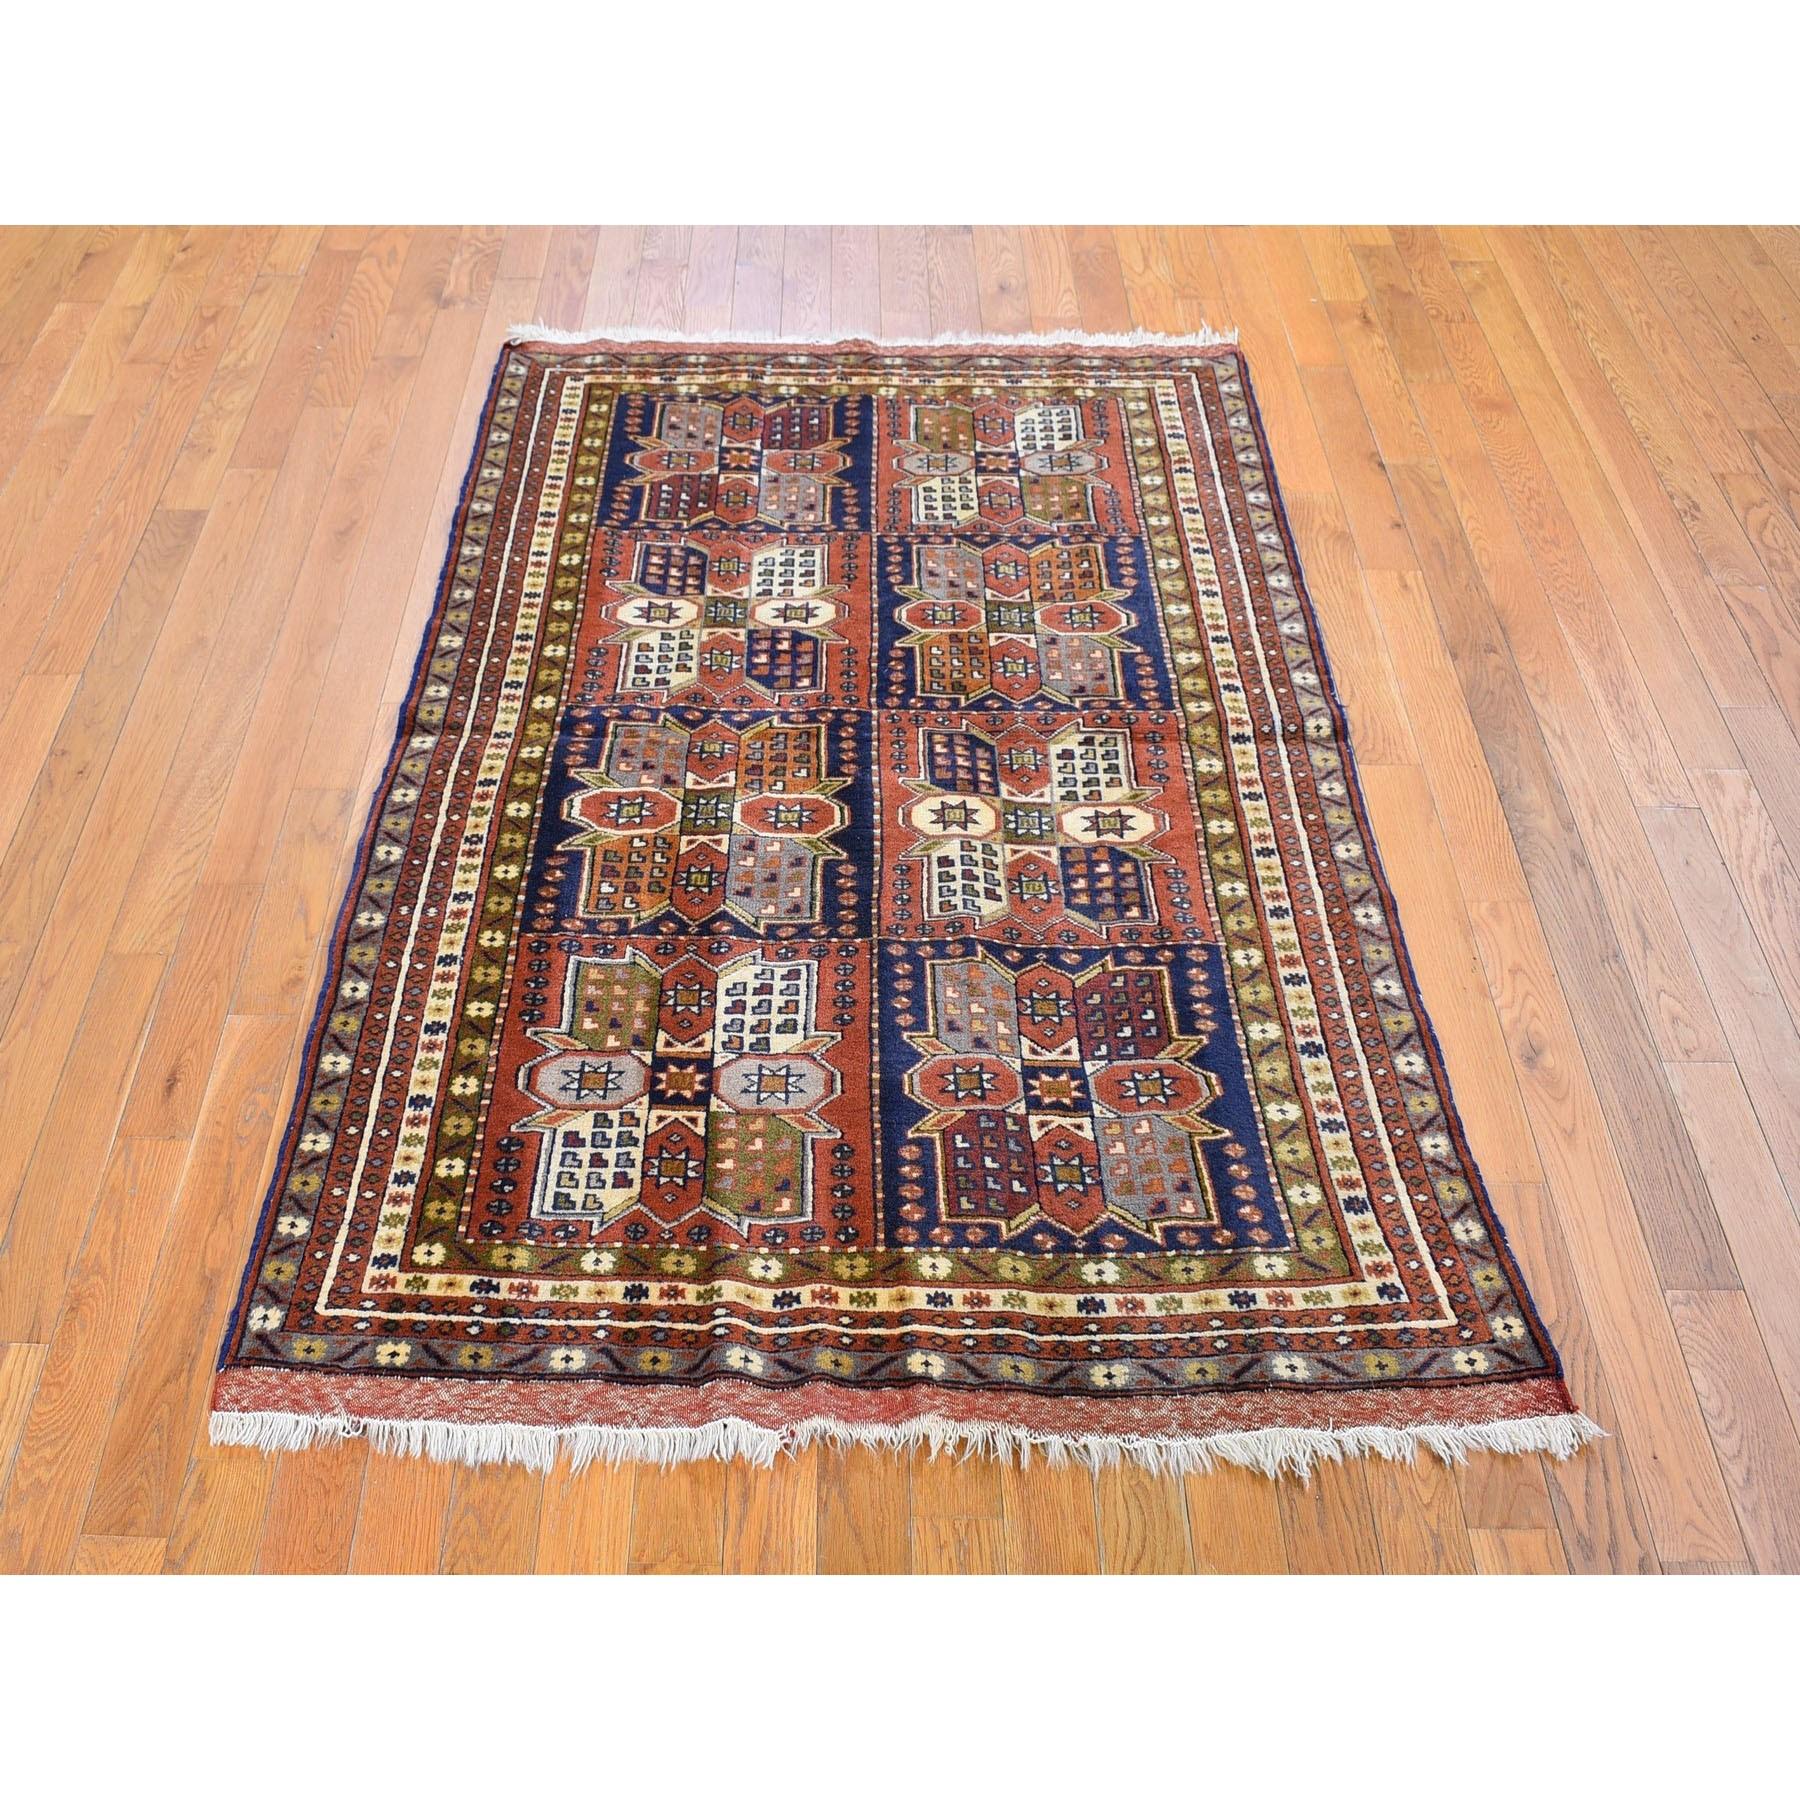 This fabulous hand-knotted carpet has been created and designed for extra strength and durability. This rug has been handcrafted for weeks in the traditional method that is used to make
Exact Rug Size in Feet and Inches : 4'0